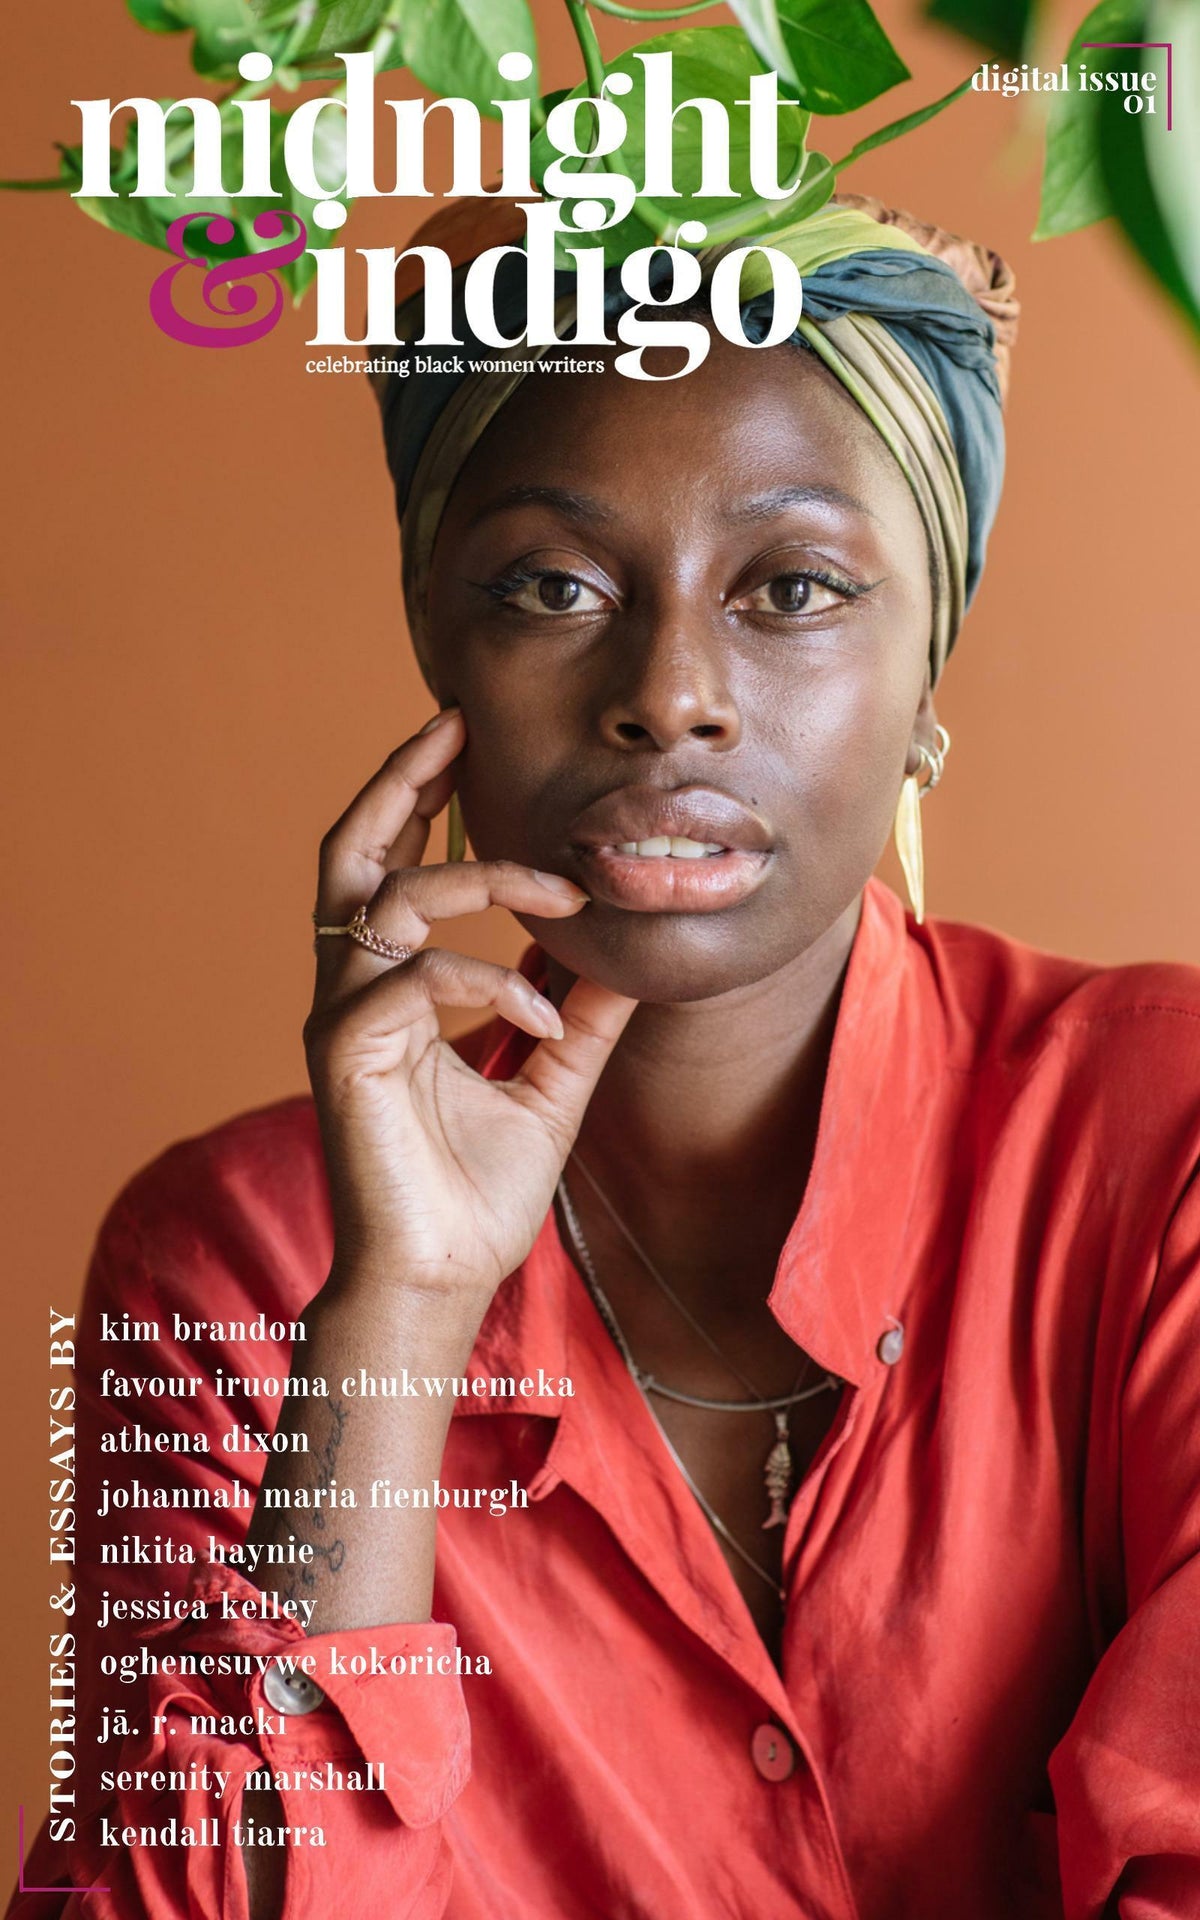 Featuring 10 short stories and essays by Black women writers from the U.S., Africa, and Europe, this issue introduces characters learning secrets, defining themselves, and making sense of love. From beach towns to round-the-way grocery stores, beauty shops to being Black-at-work, join us for a literary journey. 